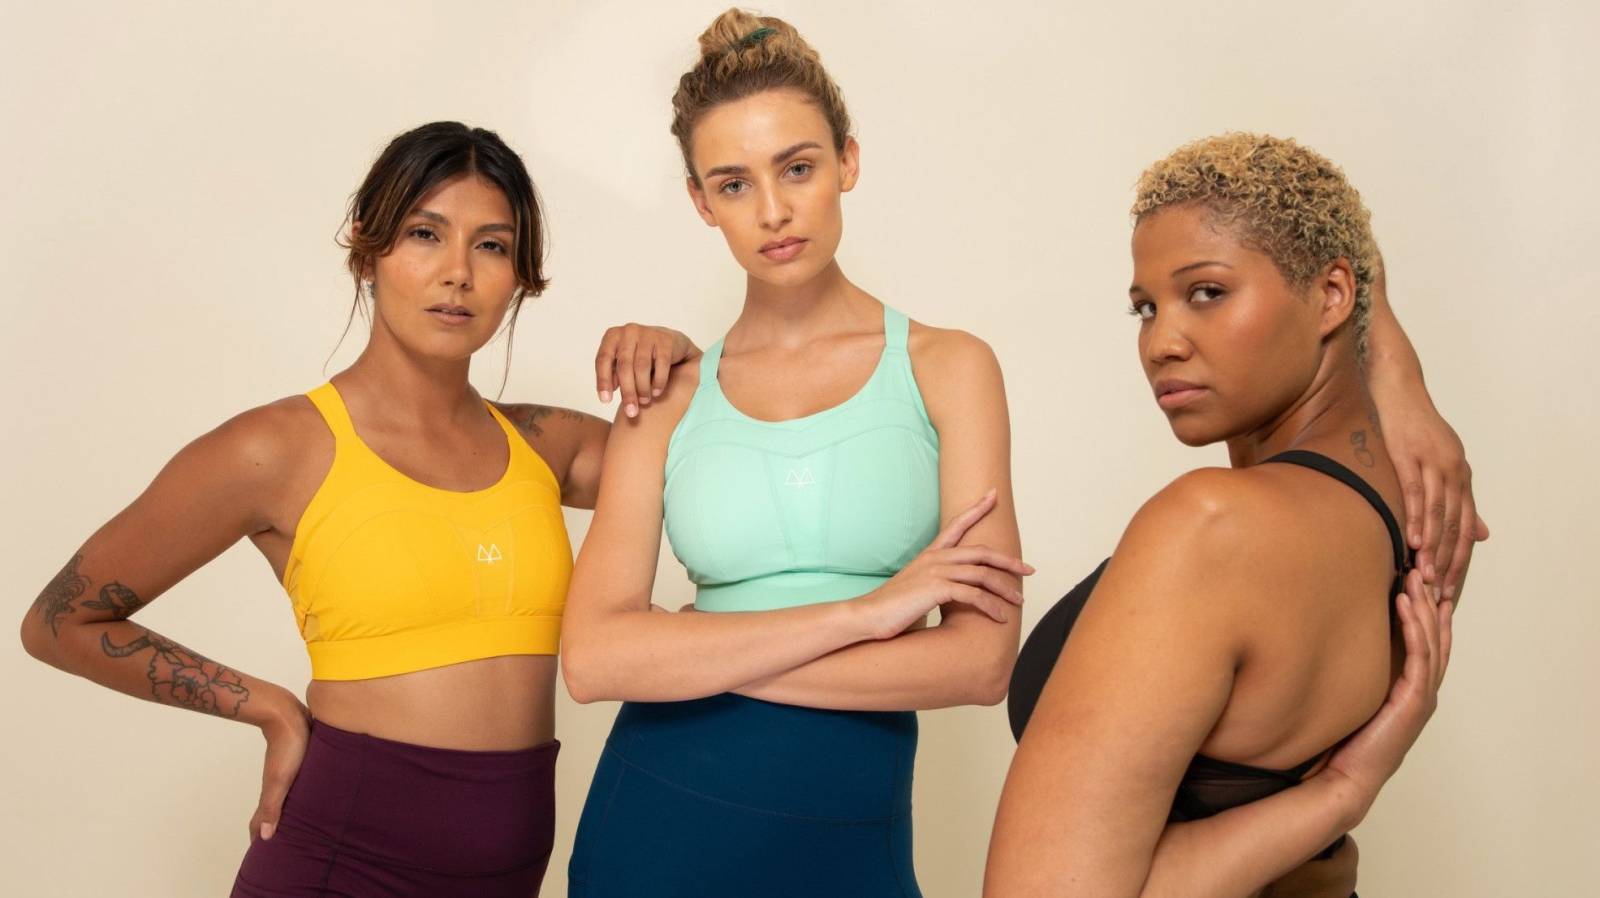 Maaree launches 2021 limited-edition bra in support of Coppafeel! And  Breast Cancer Awareness Month. - Aspire PR